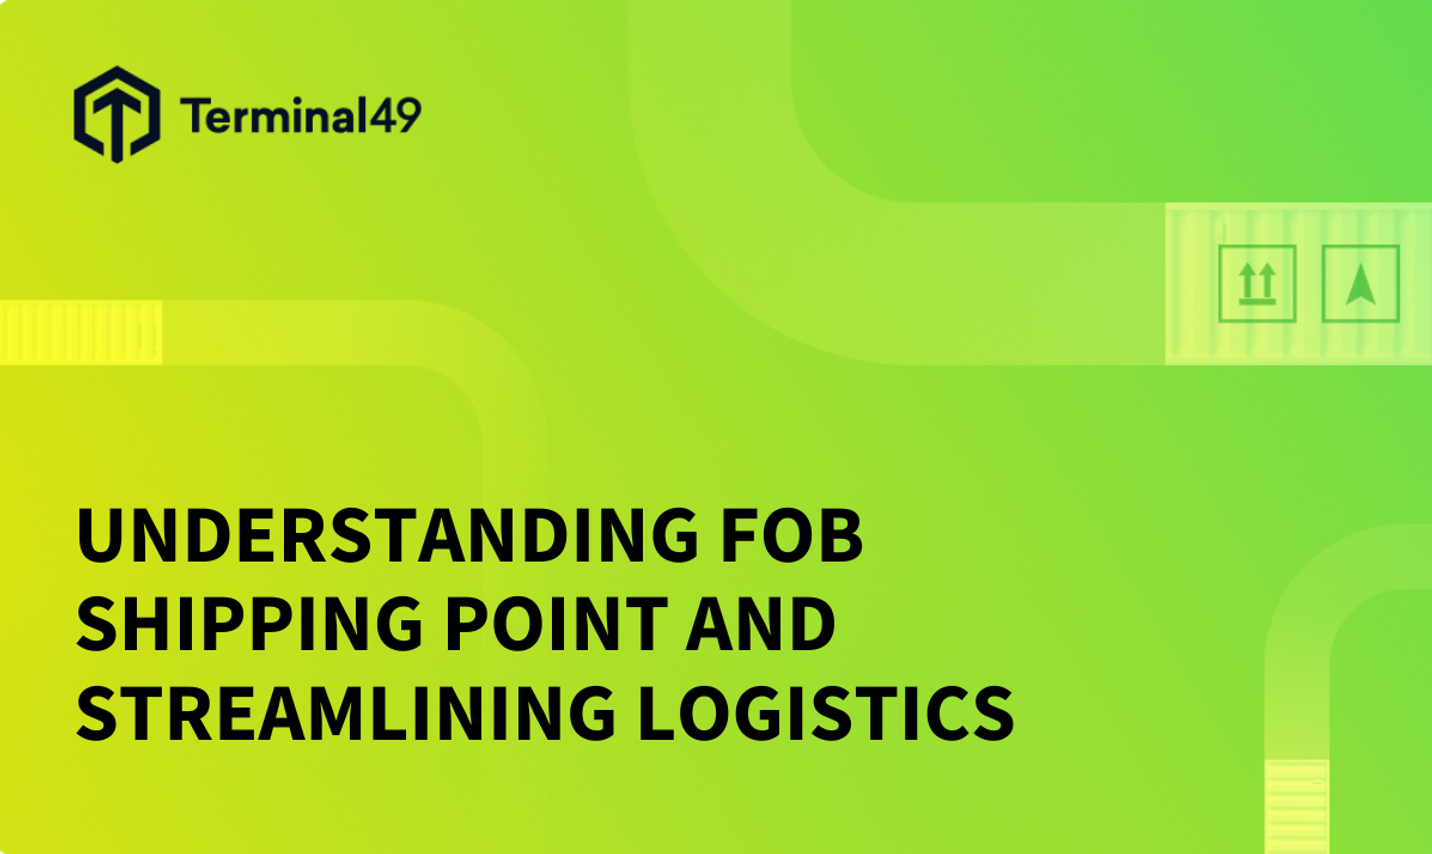 Understanding FOB Shipping Point and Streamlining Logistics with Terminal49